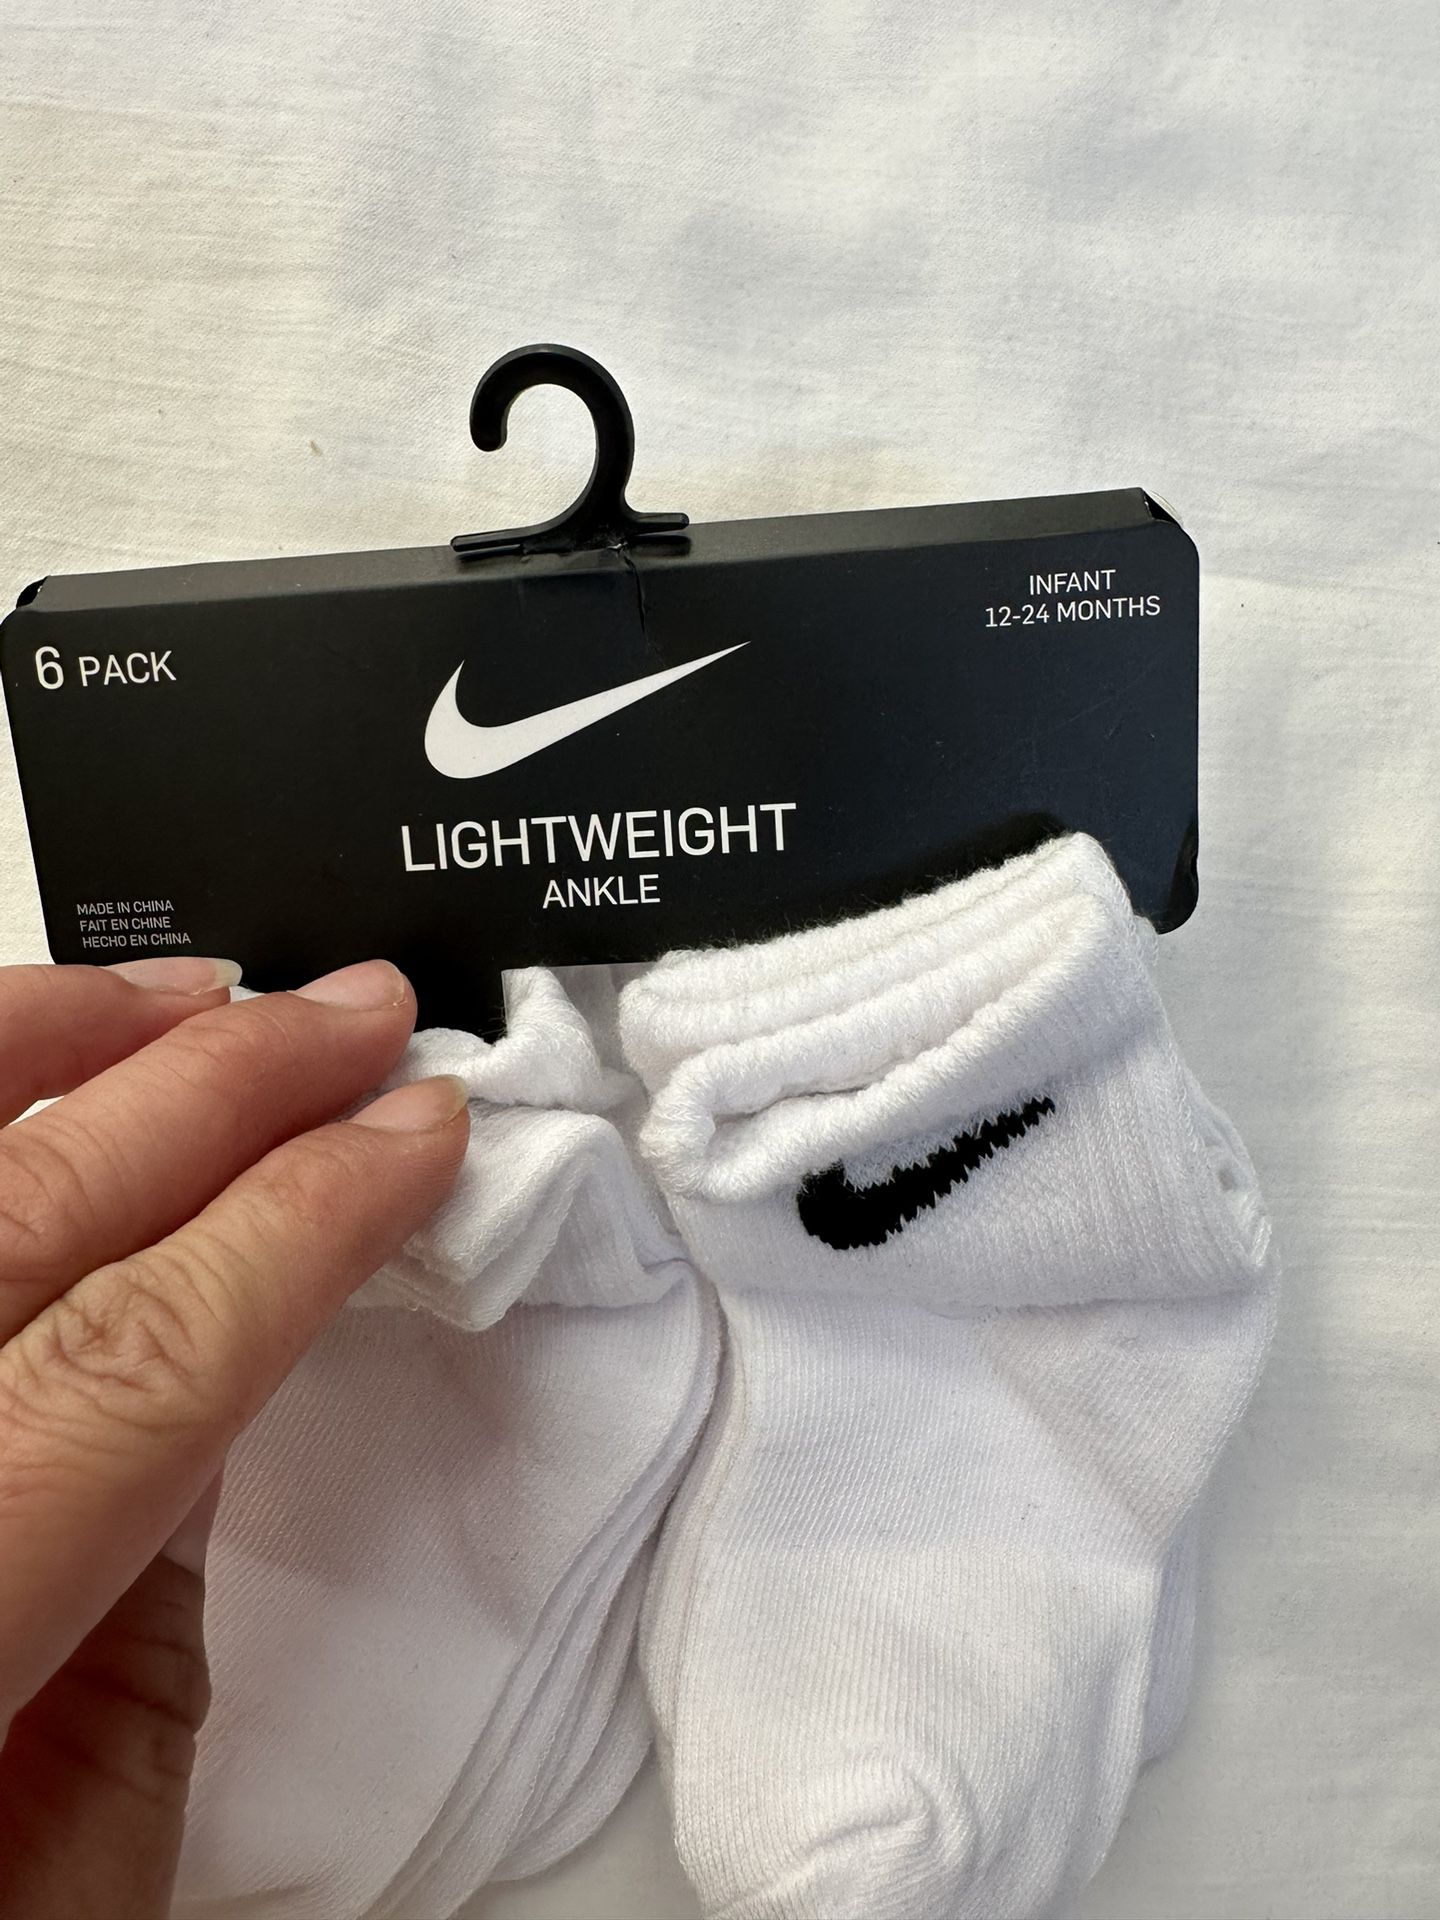 NIKE unisex infant Socks Ankle 6prs White Lightweight ankle Ages 12 - 24mons